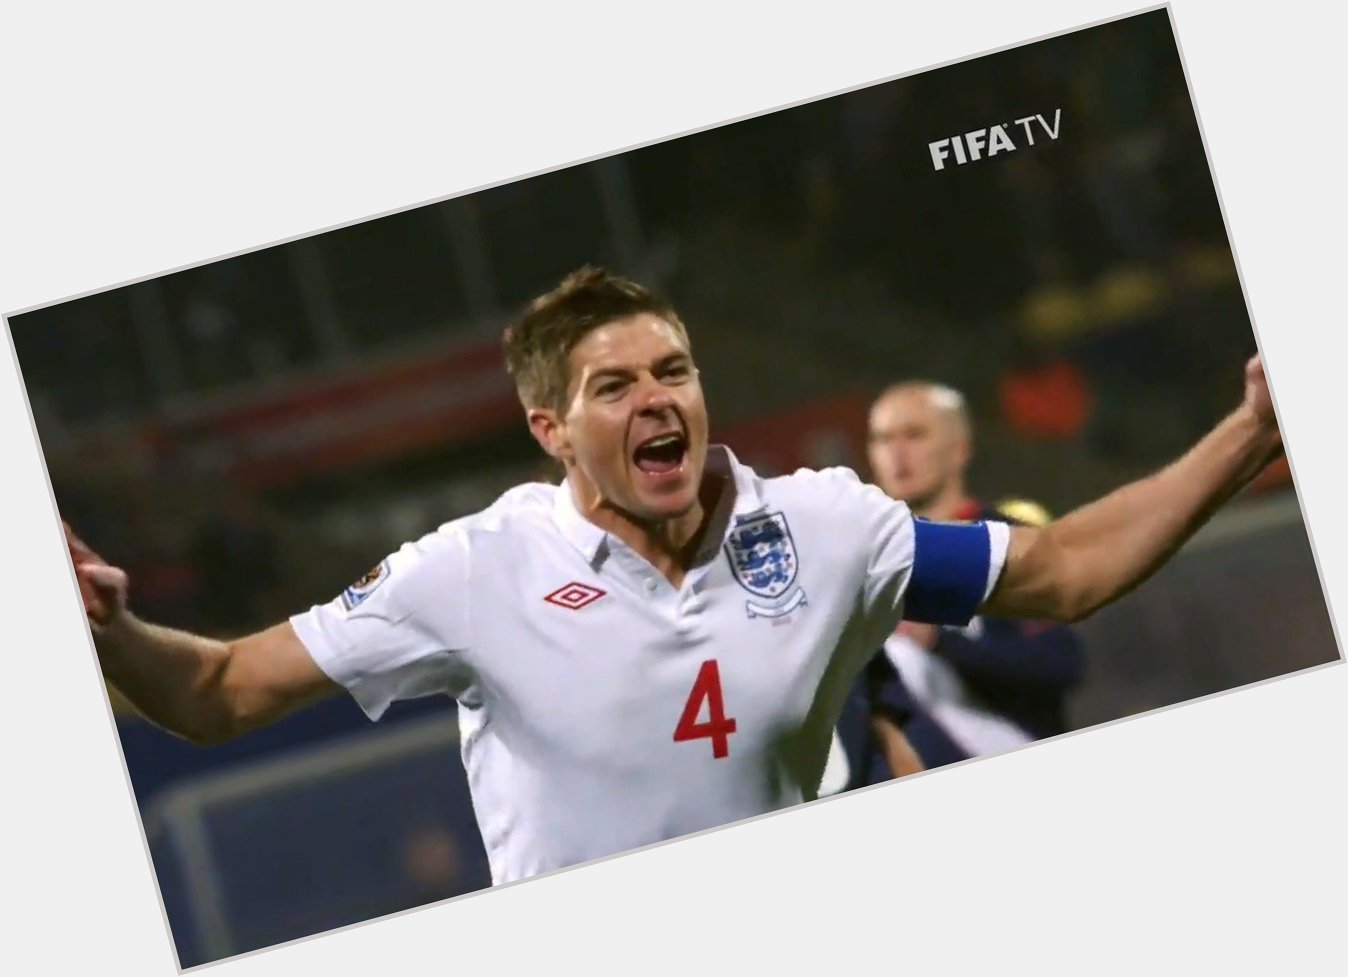 FIFAWorldCup: Happy birthday, Steven Gerrard Who is your favourite England midfielder of all time?       